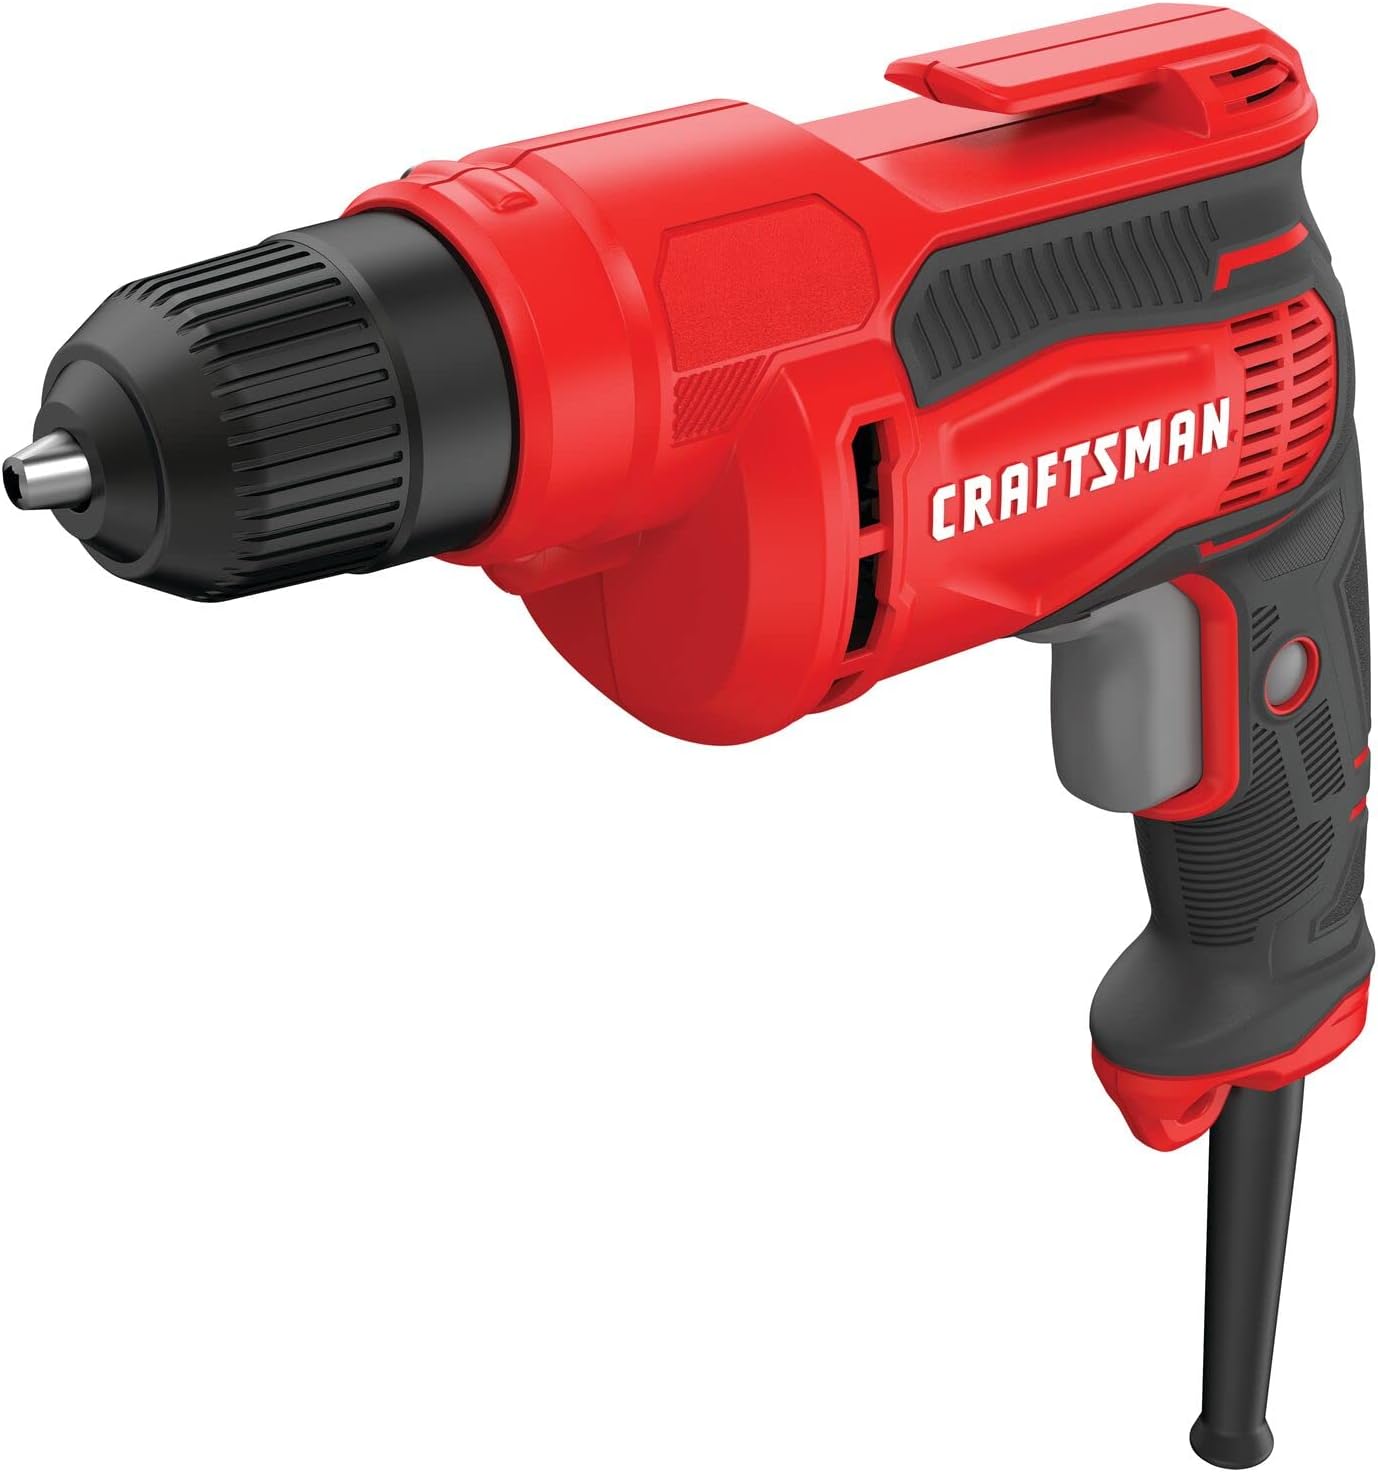 CRAFTSMAN Drill / Driver, 7-Amp, 3/8-Inch (CMED731)